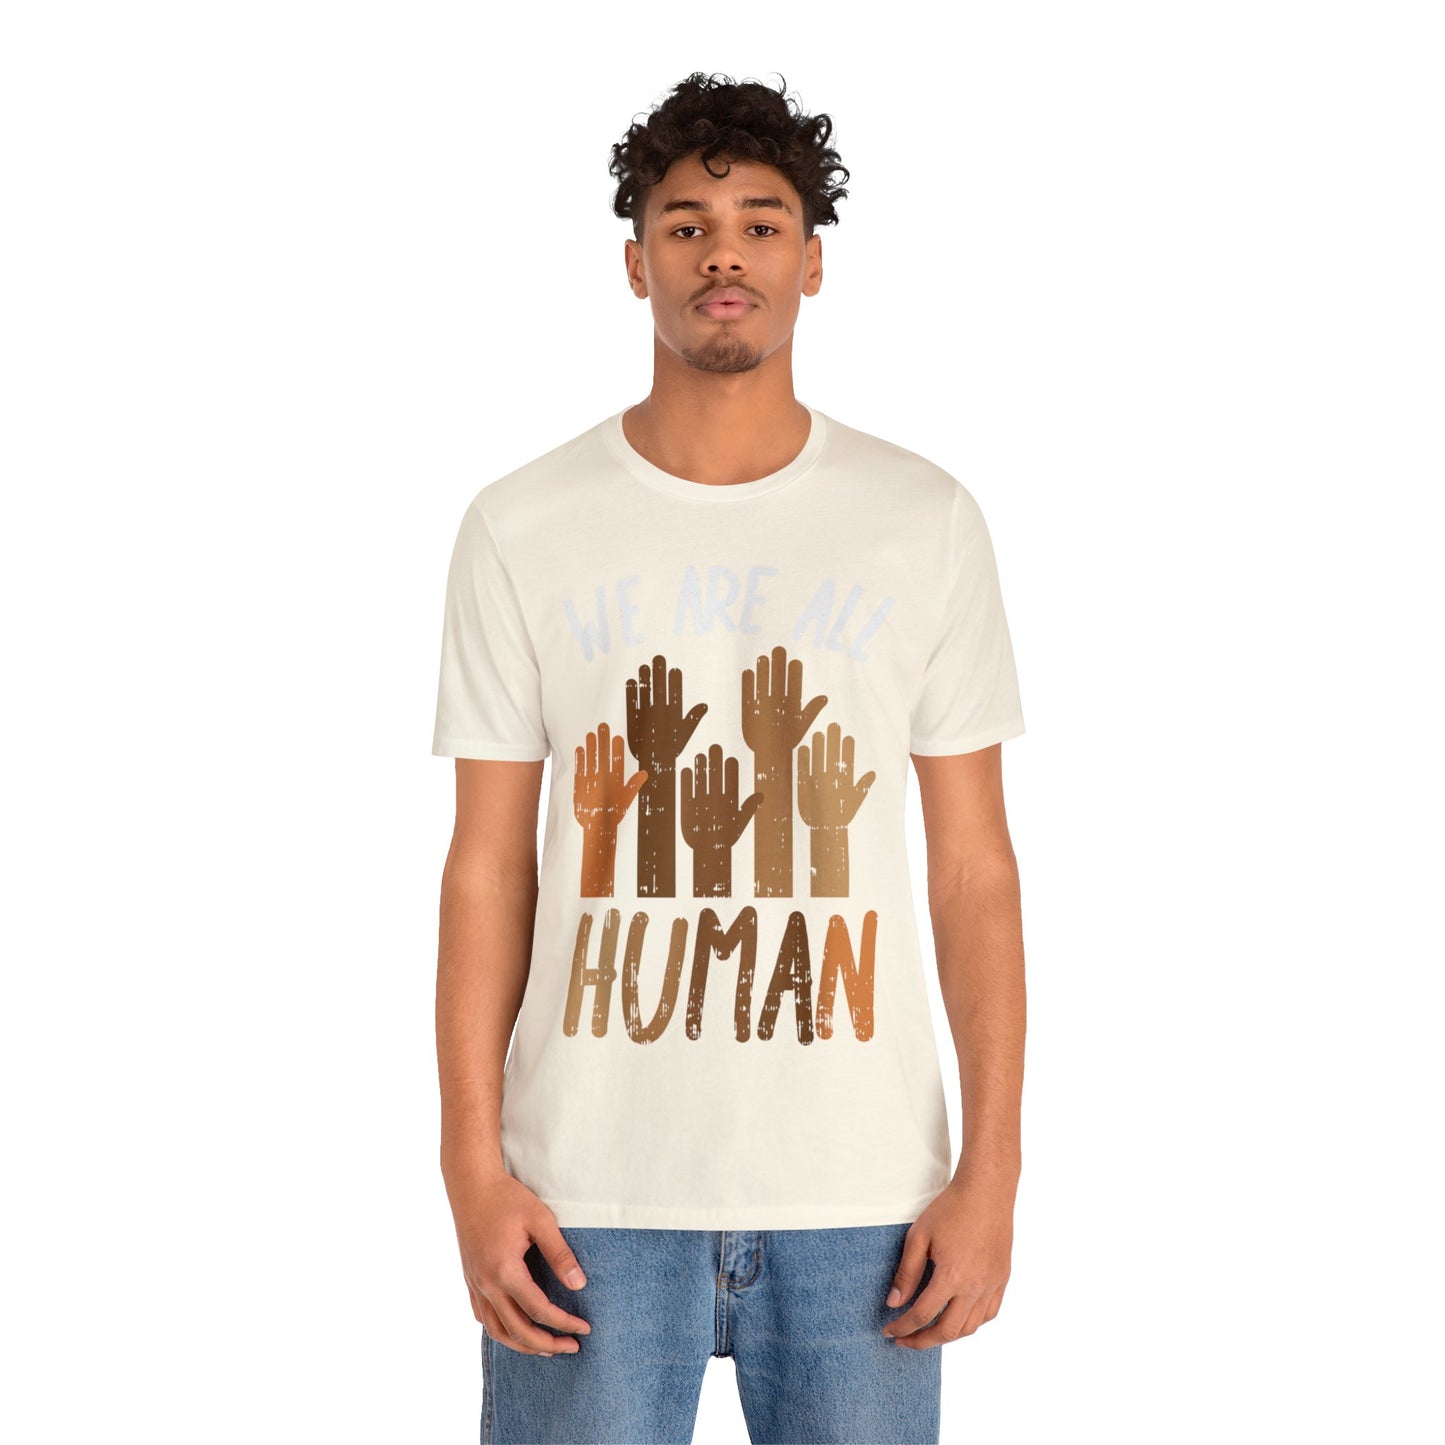 We Are All Human - Bella Canvas -  Unisex Jersey Short Sleeve Tee